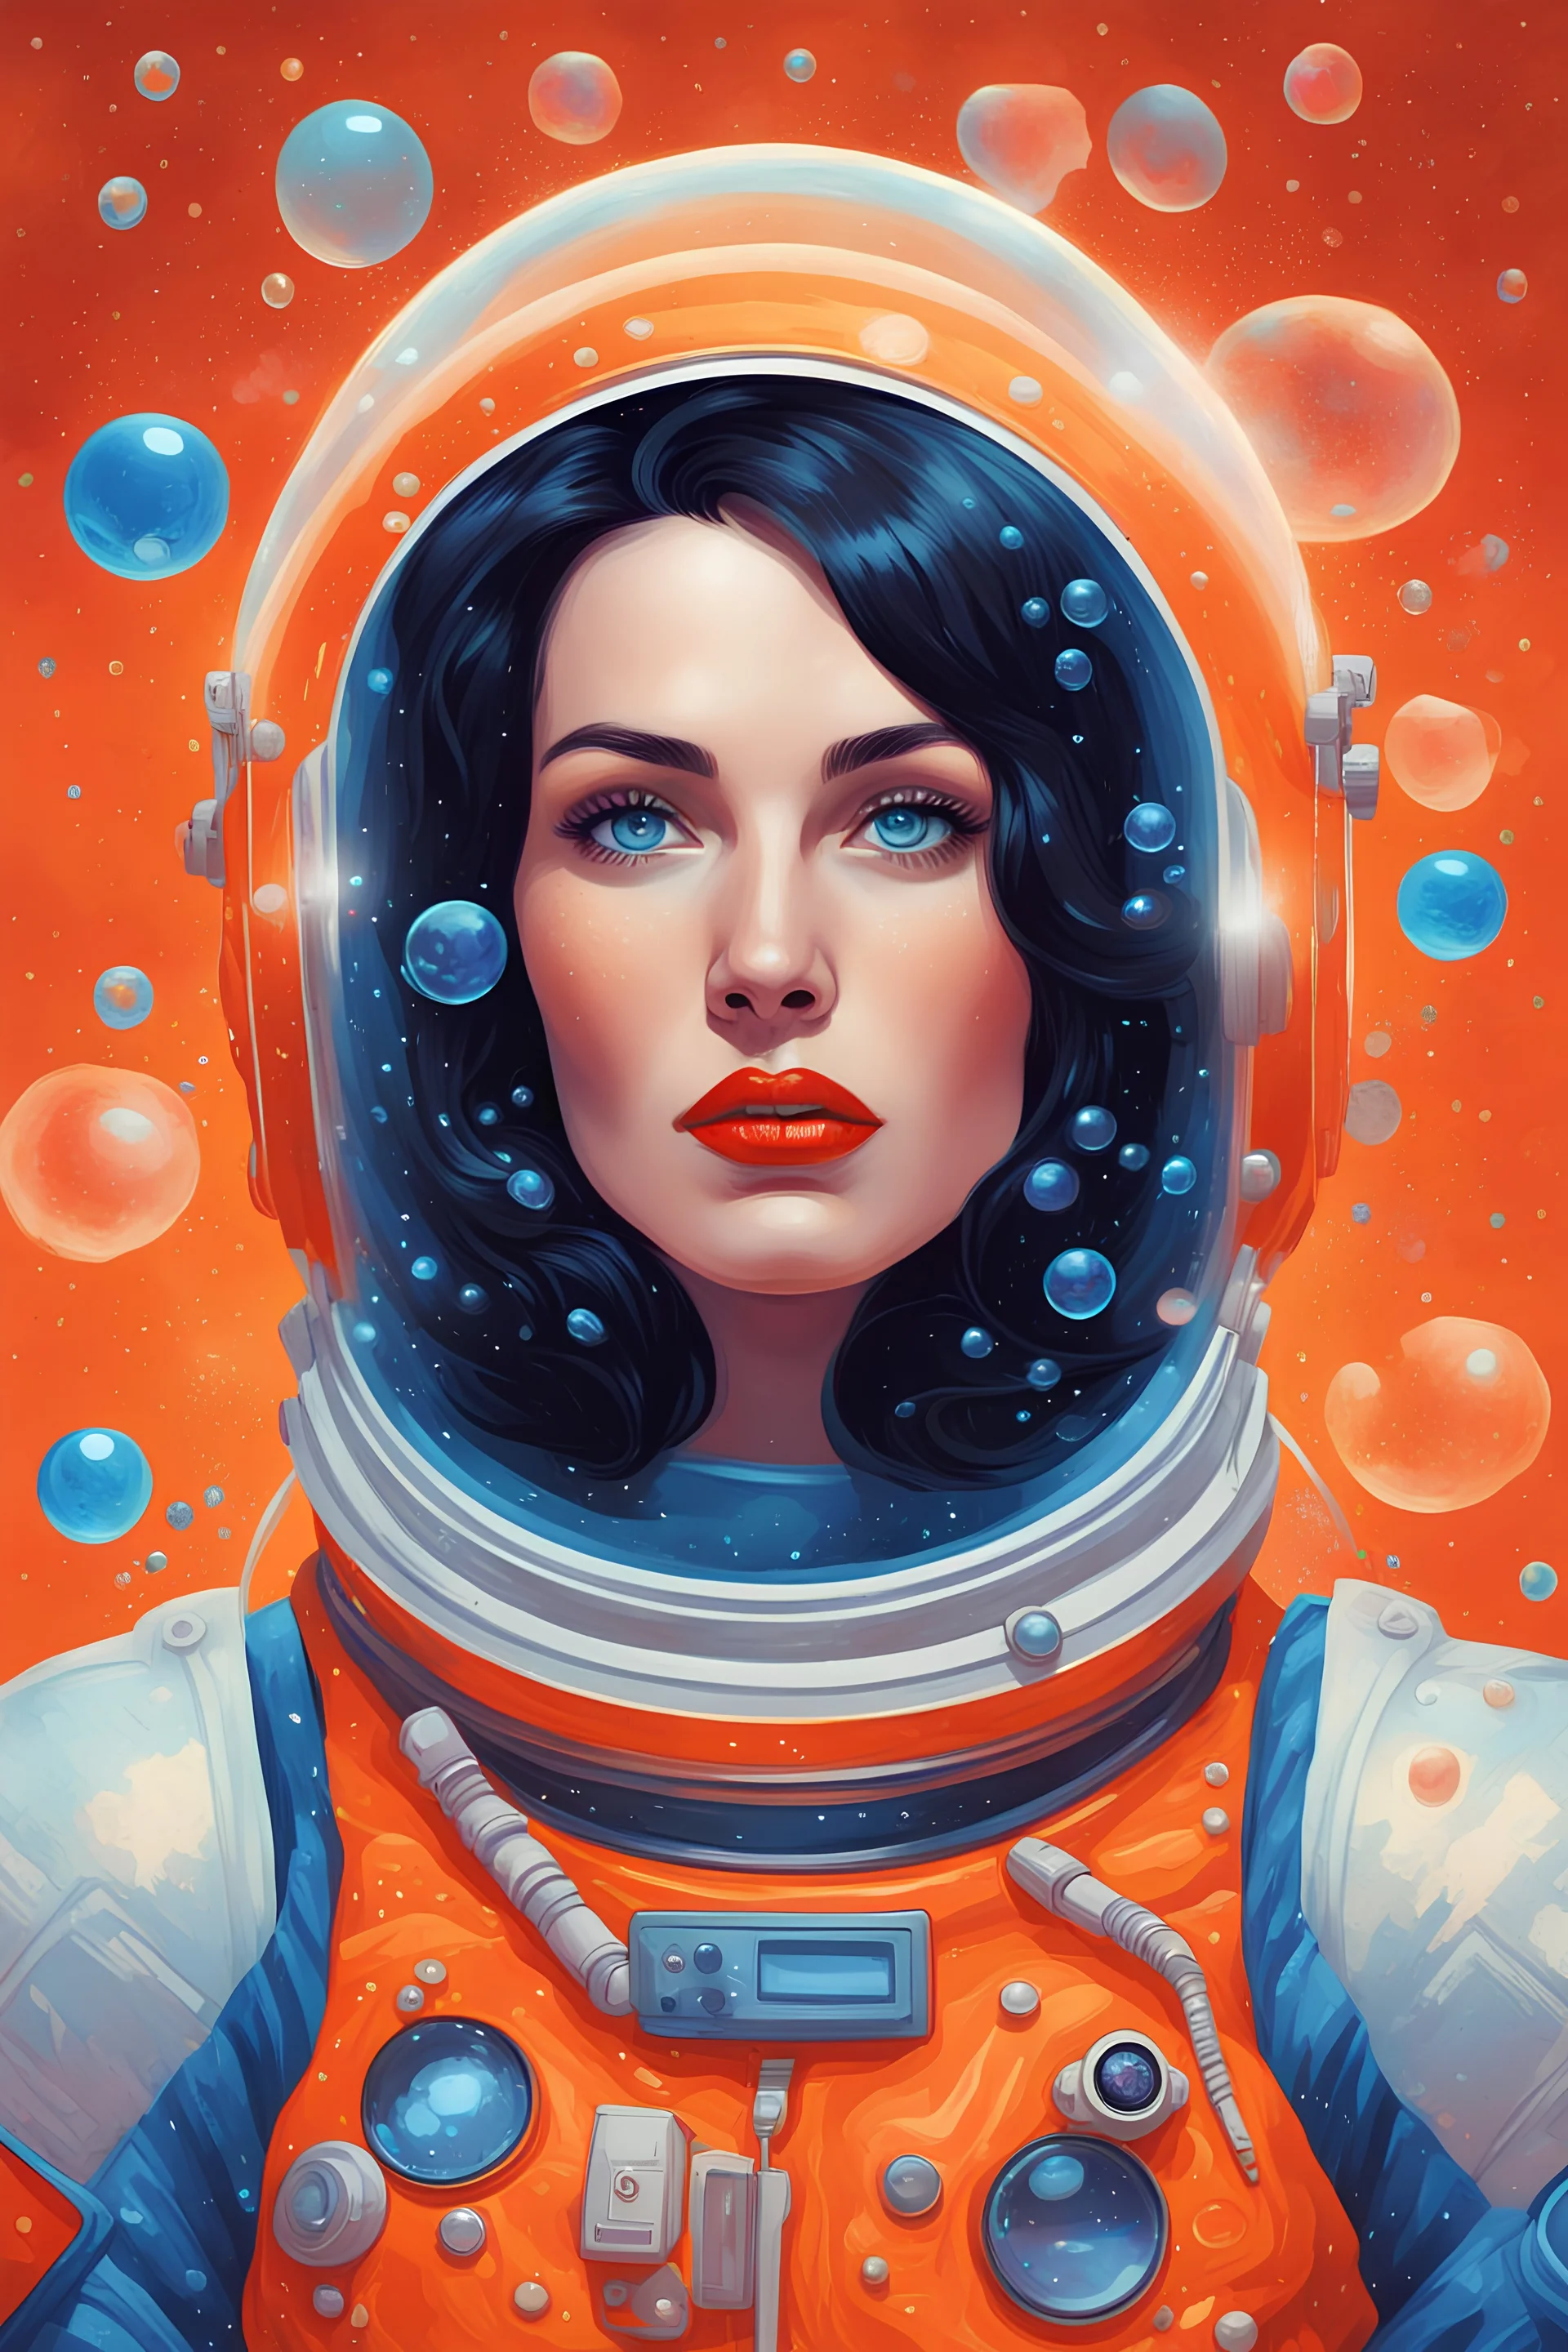 A retrofuturistic portrait of an astronaut woman with dark hair, wearing a space suit and surrounded by floating bubbles on an orange background. She has red lipstick and blue eyes, looking at the camera. The artwork is in a vintage style, reminiscent of classic science fiction illustrations from old books. It's in vibrant colors, with detailed attention to her costume and accessories in the style of classic science fiction illustrations. --ar 4:5 --v 6. 0